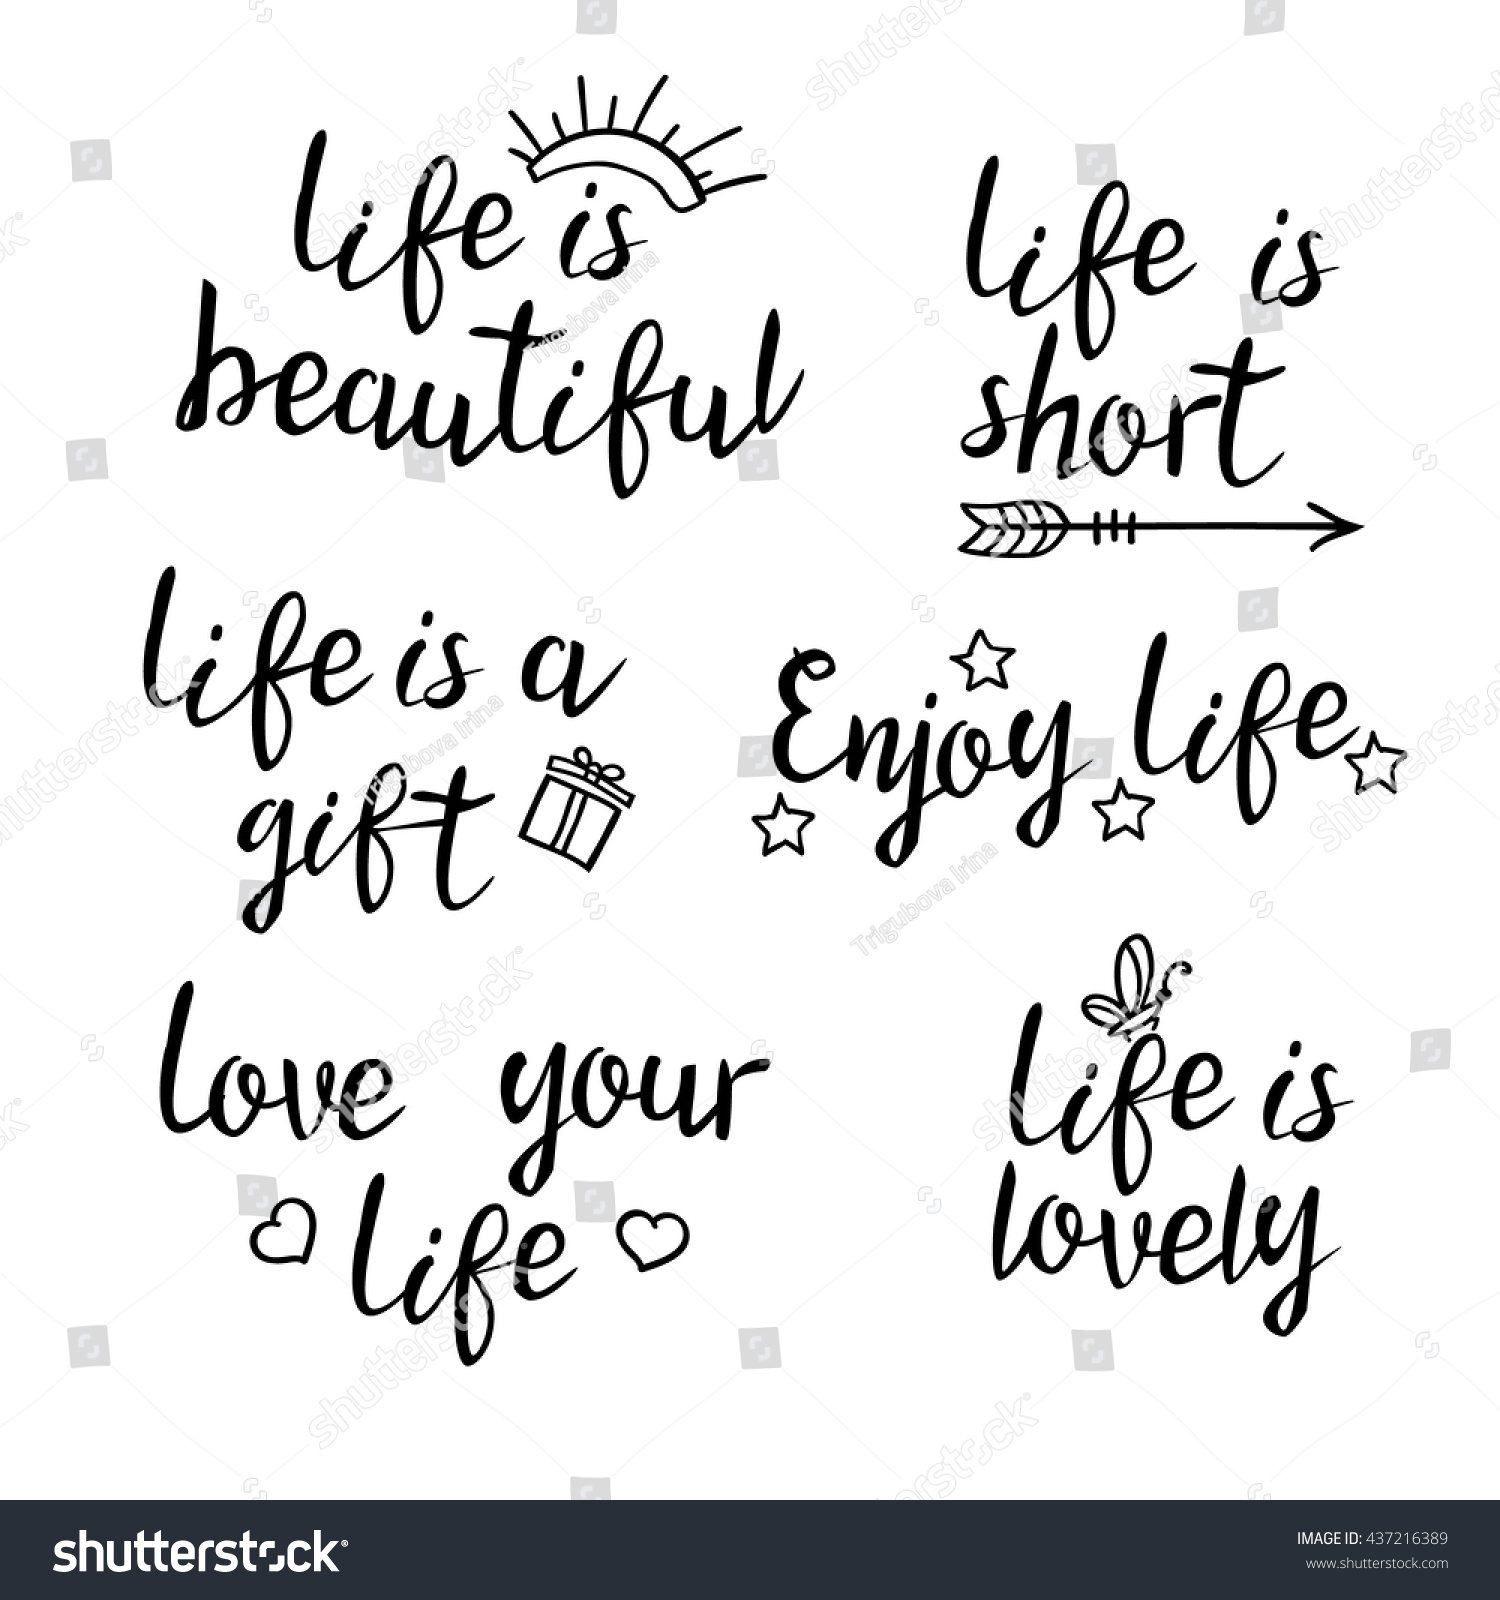 Lettering life quotes Calligraphy Inspirational quote about life For postcard poster graphic design Life is beautiful short lovely